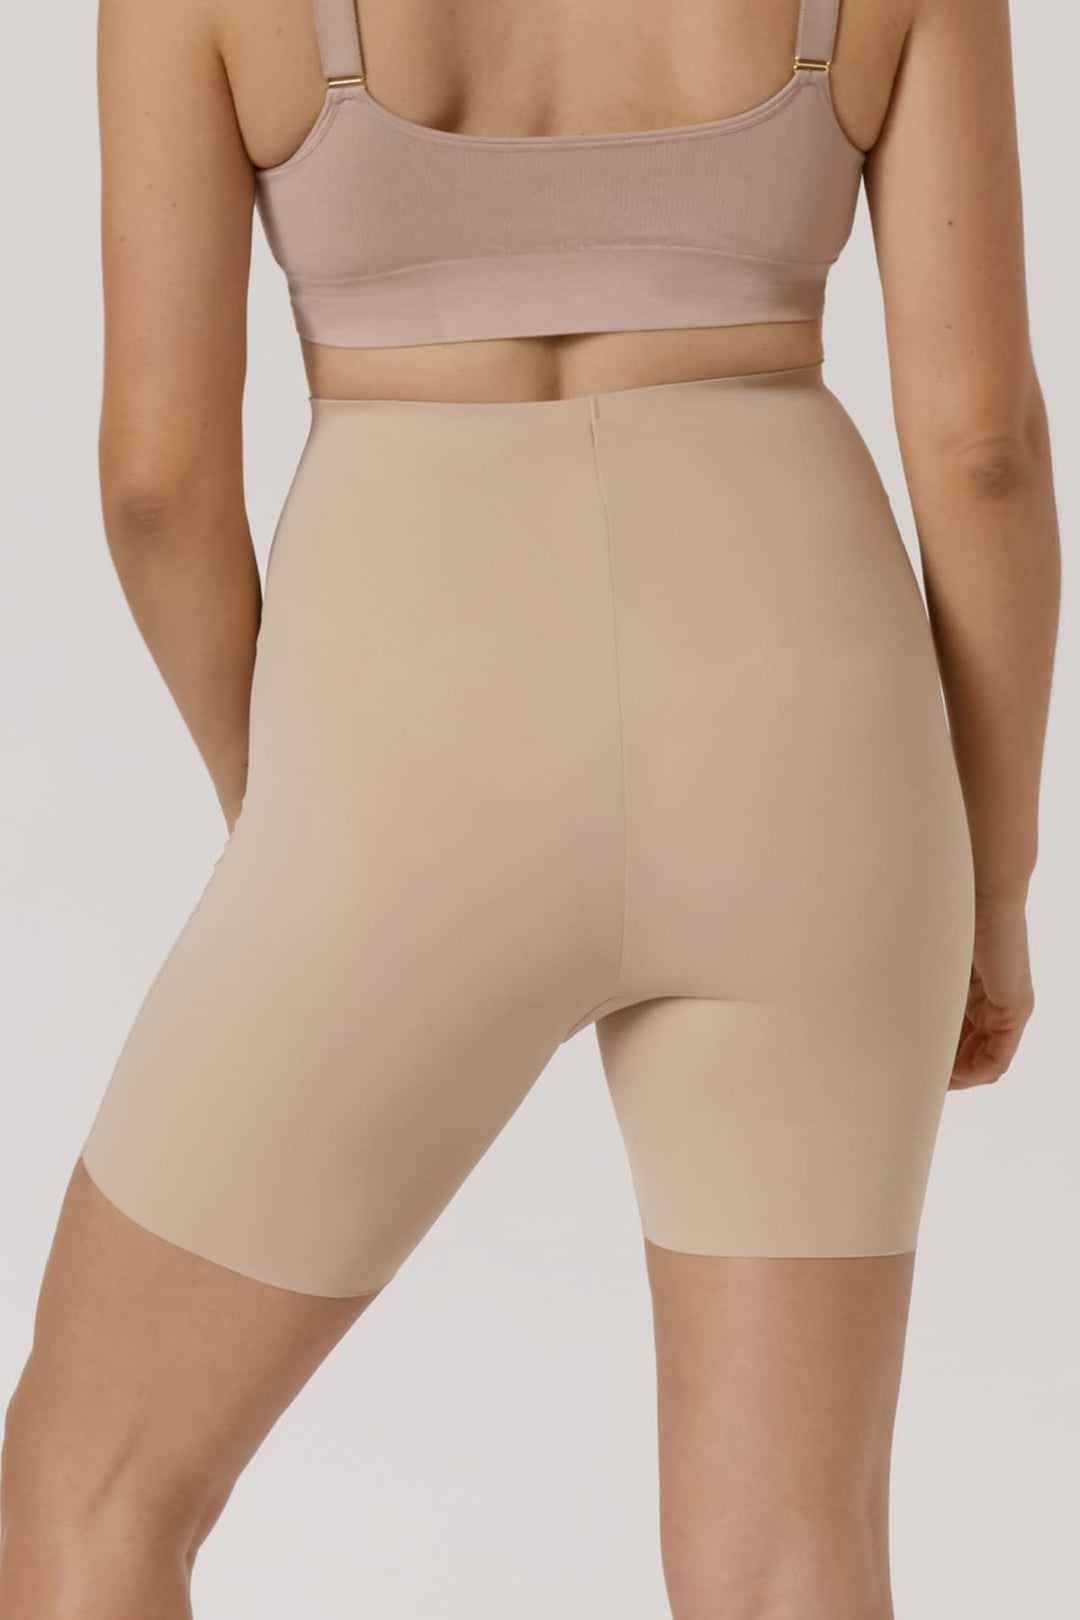 Fabric Used for Shapewear - ahead of the curve